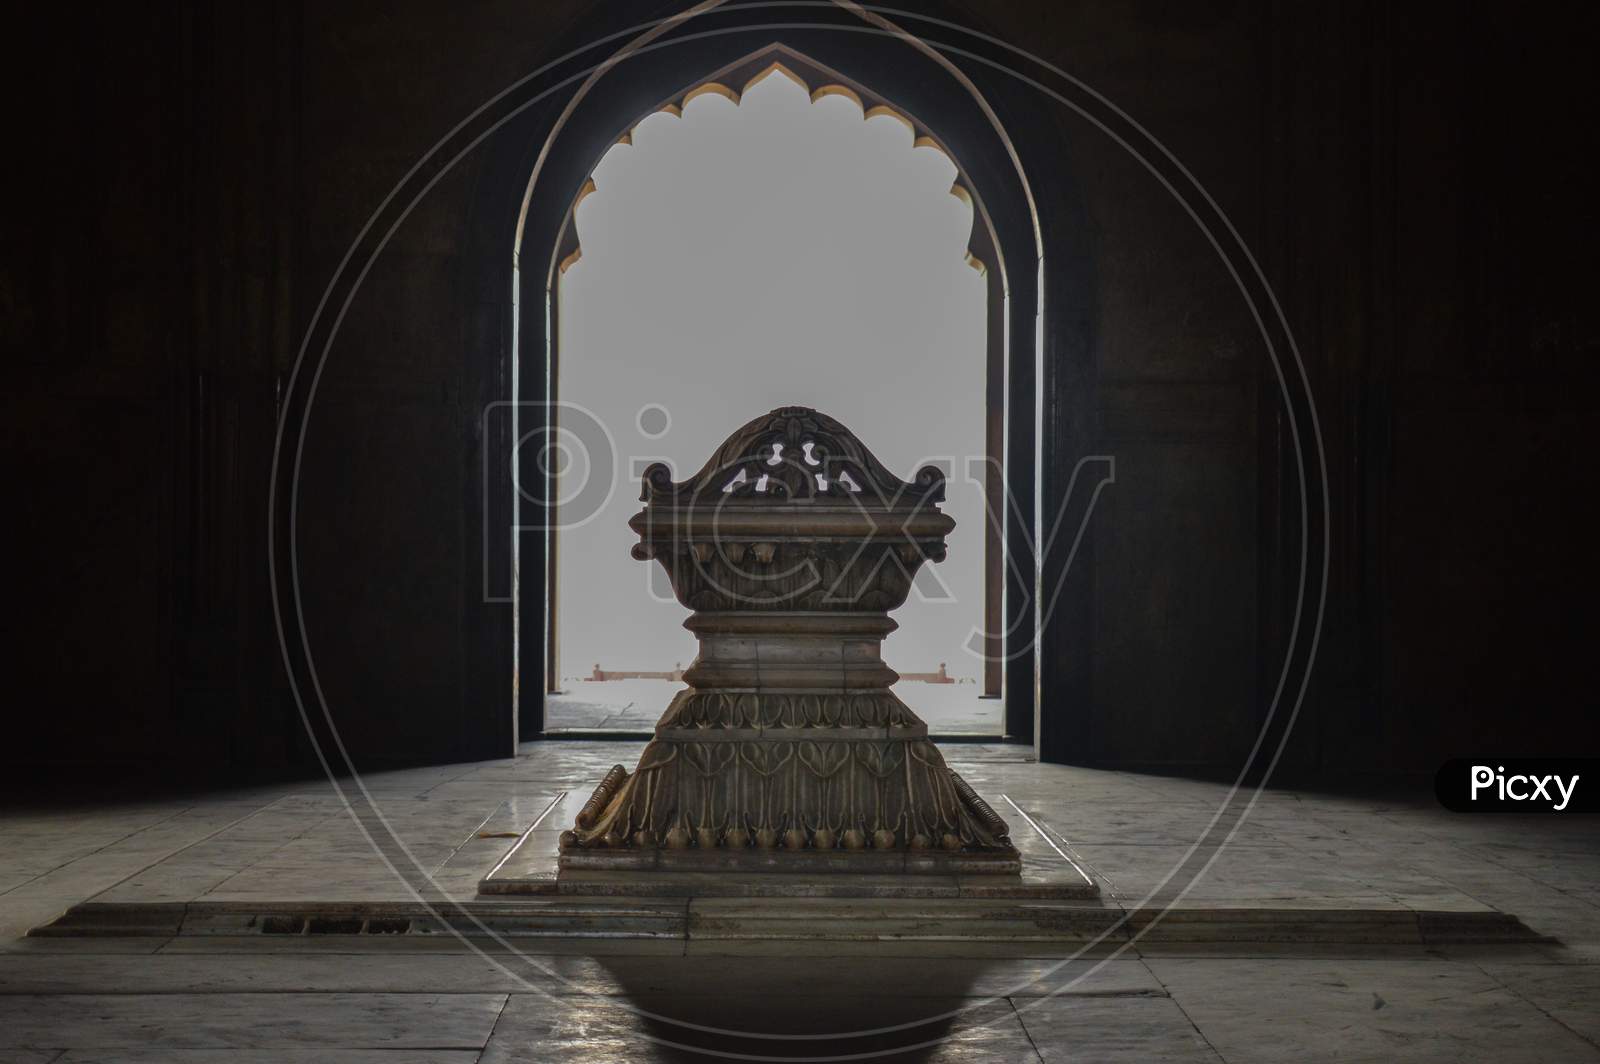 A Side View Of Mausoleum Of King Safdarjung Made Out Of White Marble Inside The Main Tomb Of Safdarjung Memorial At Winter Morning.